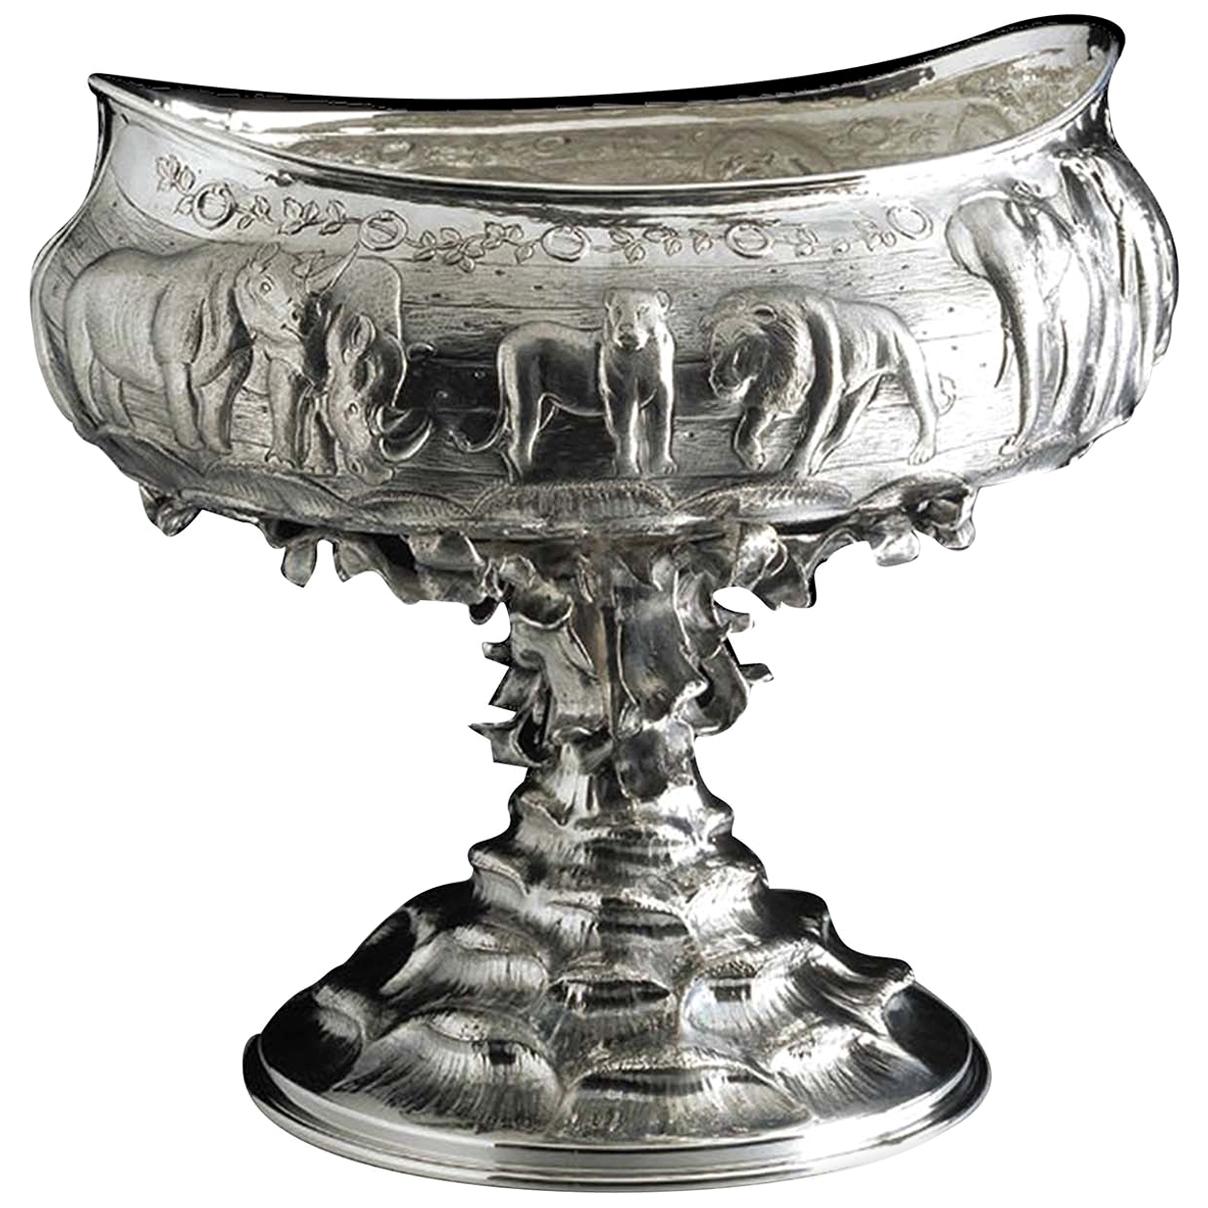 The Great Flood Decorative Bowl For Sale